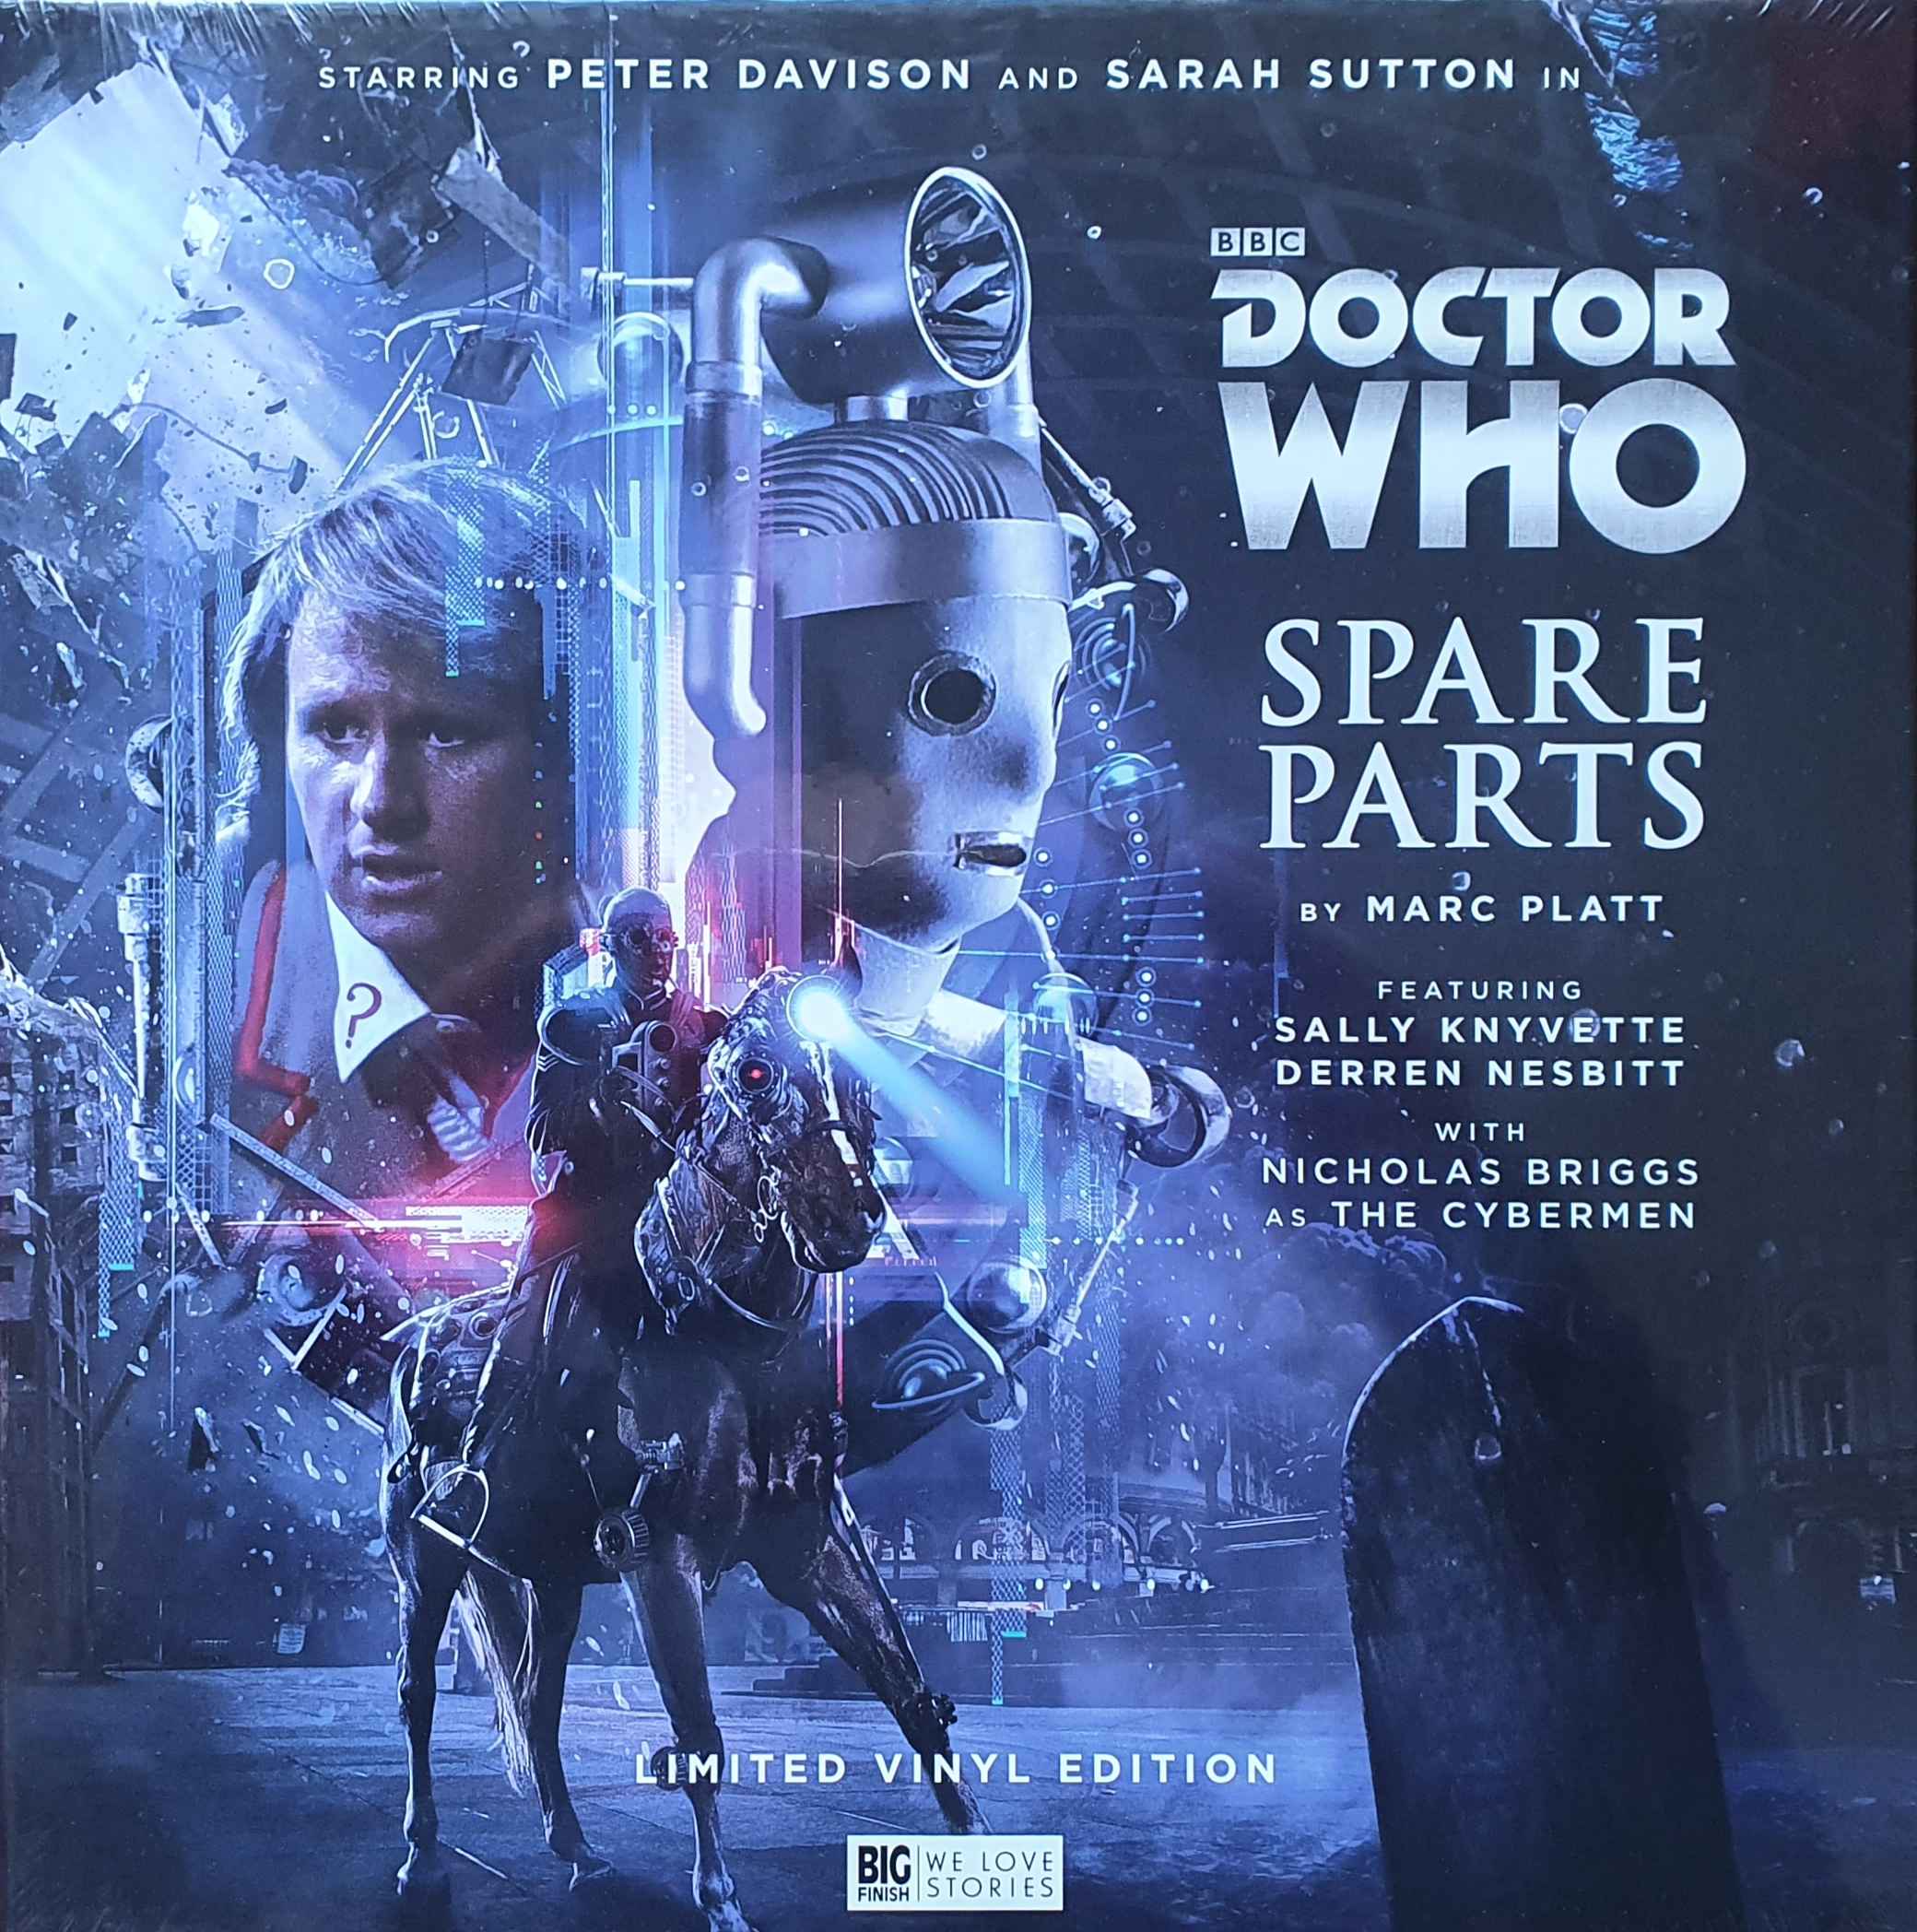 Picture of BFPDWCD6CELP Doctor Who - Spare parts (Limited edition) by artist Marc Platt from the BBC albums - Records and Tapes library